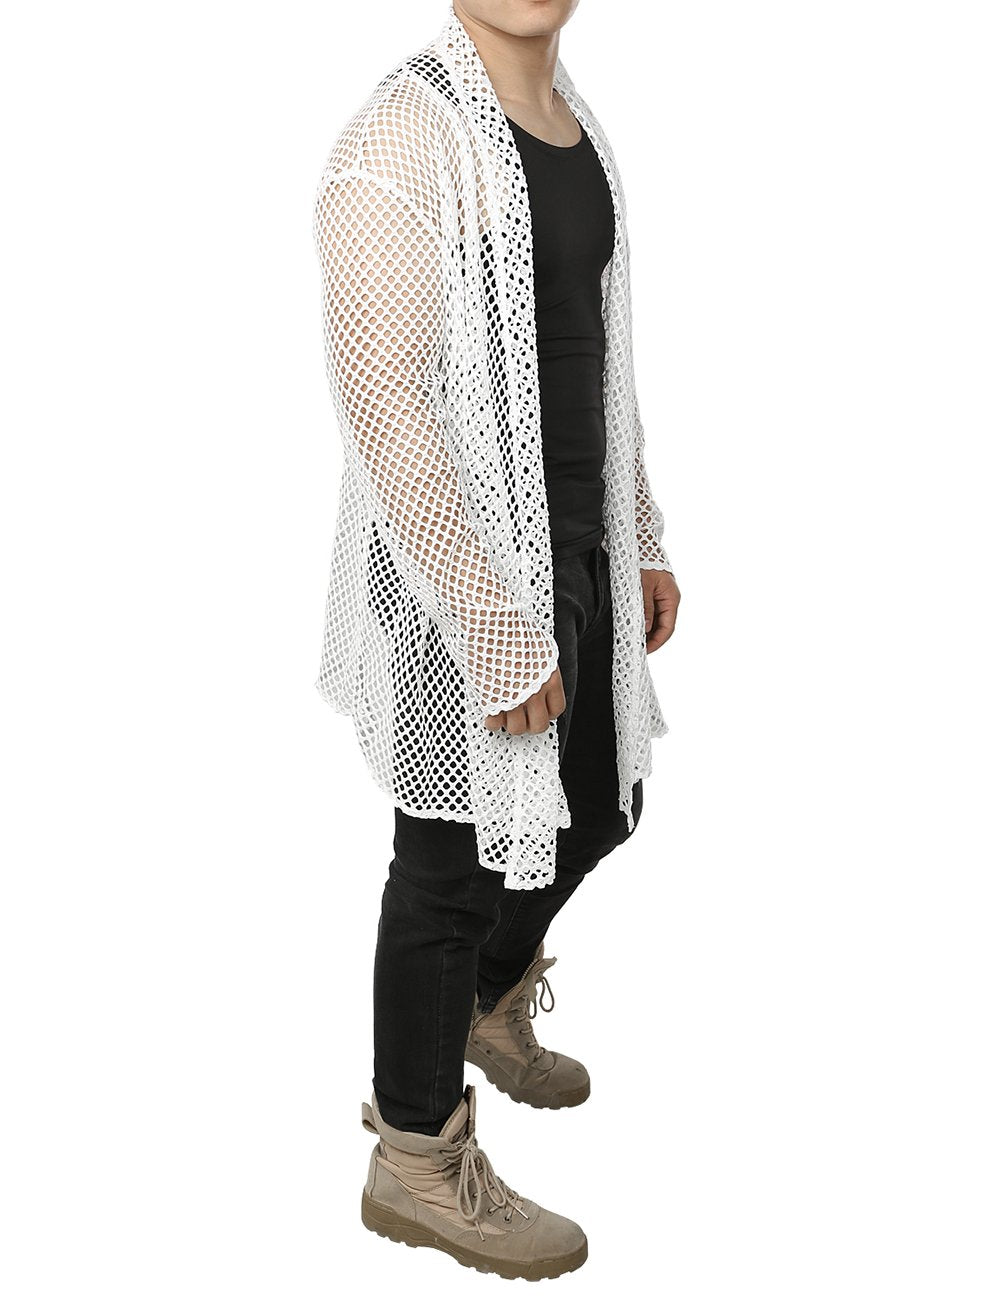 Men's Mesh Fishnet Fitted Muscle Cardigan